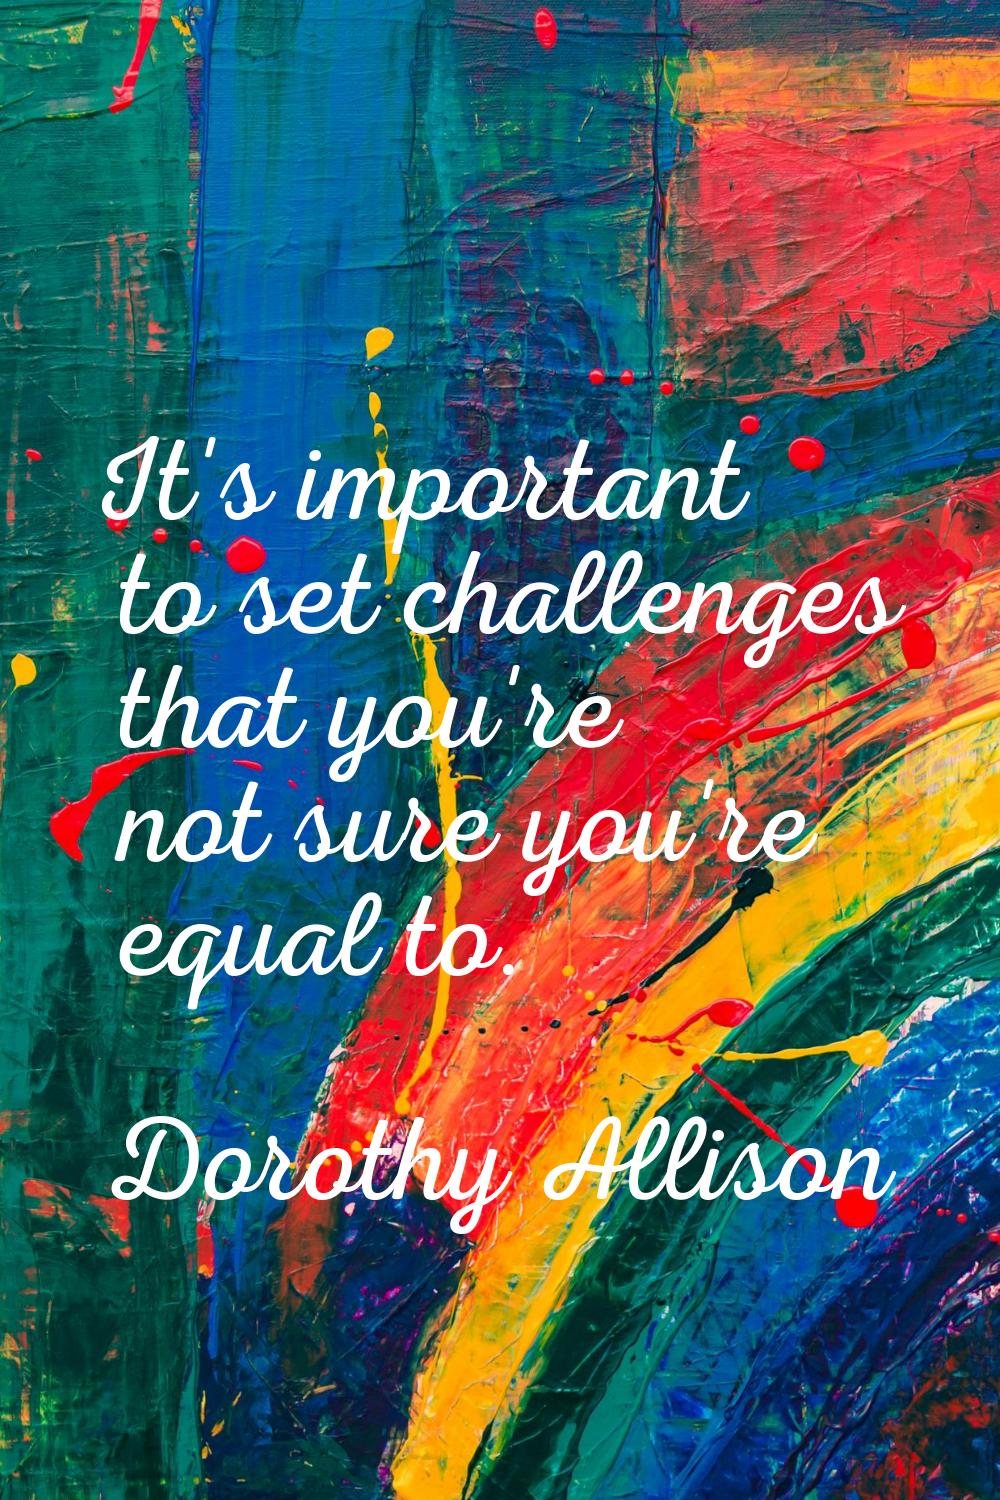 It's important to set challenges that you're not sure you're equal to.